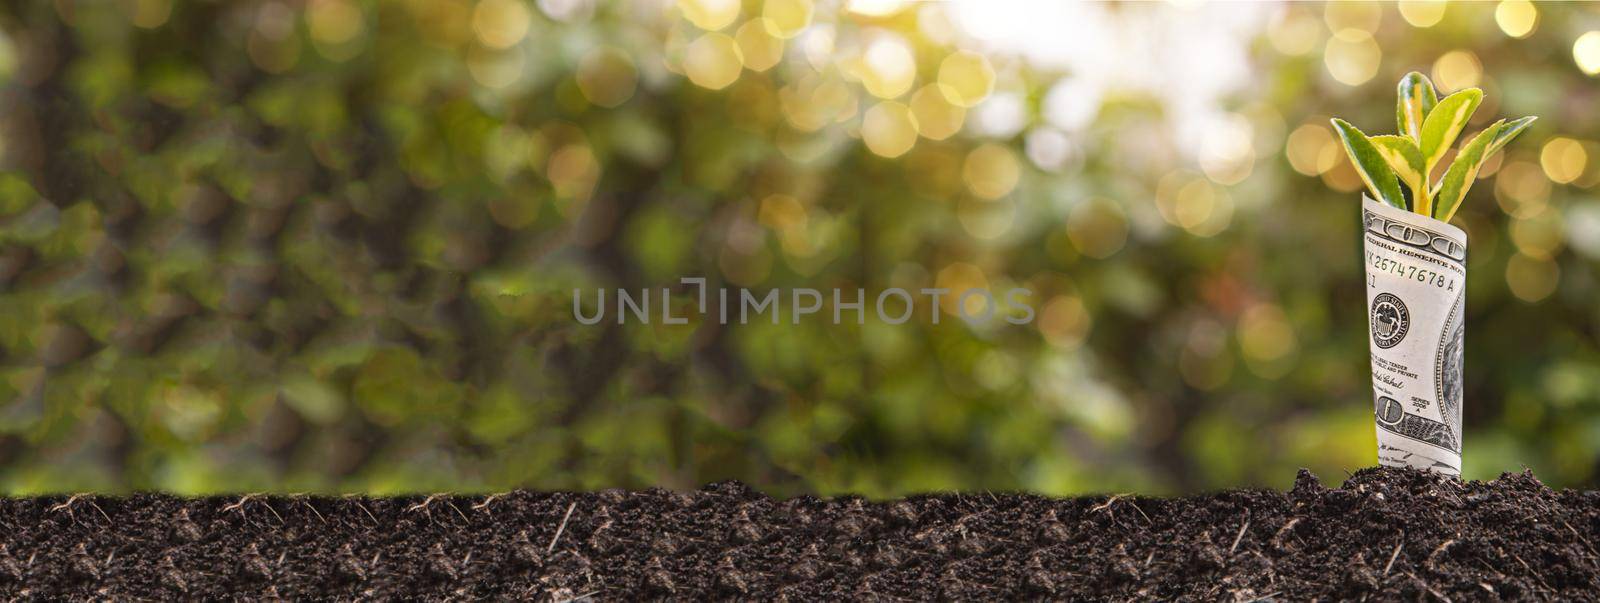 Economic Growth symbol one hundred dollar bill with a plant or leaf growing out of the earth with blurred green background, banner image with copy space